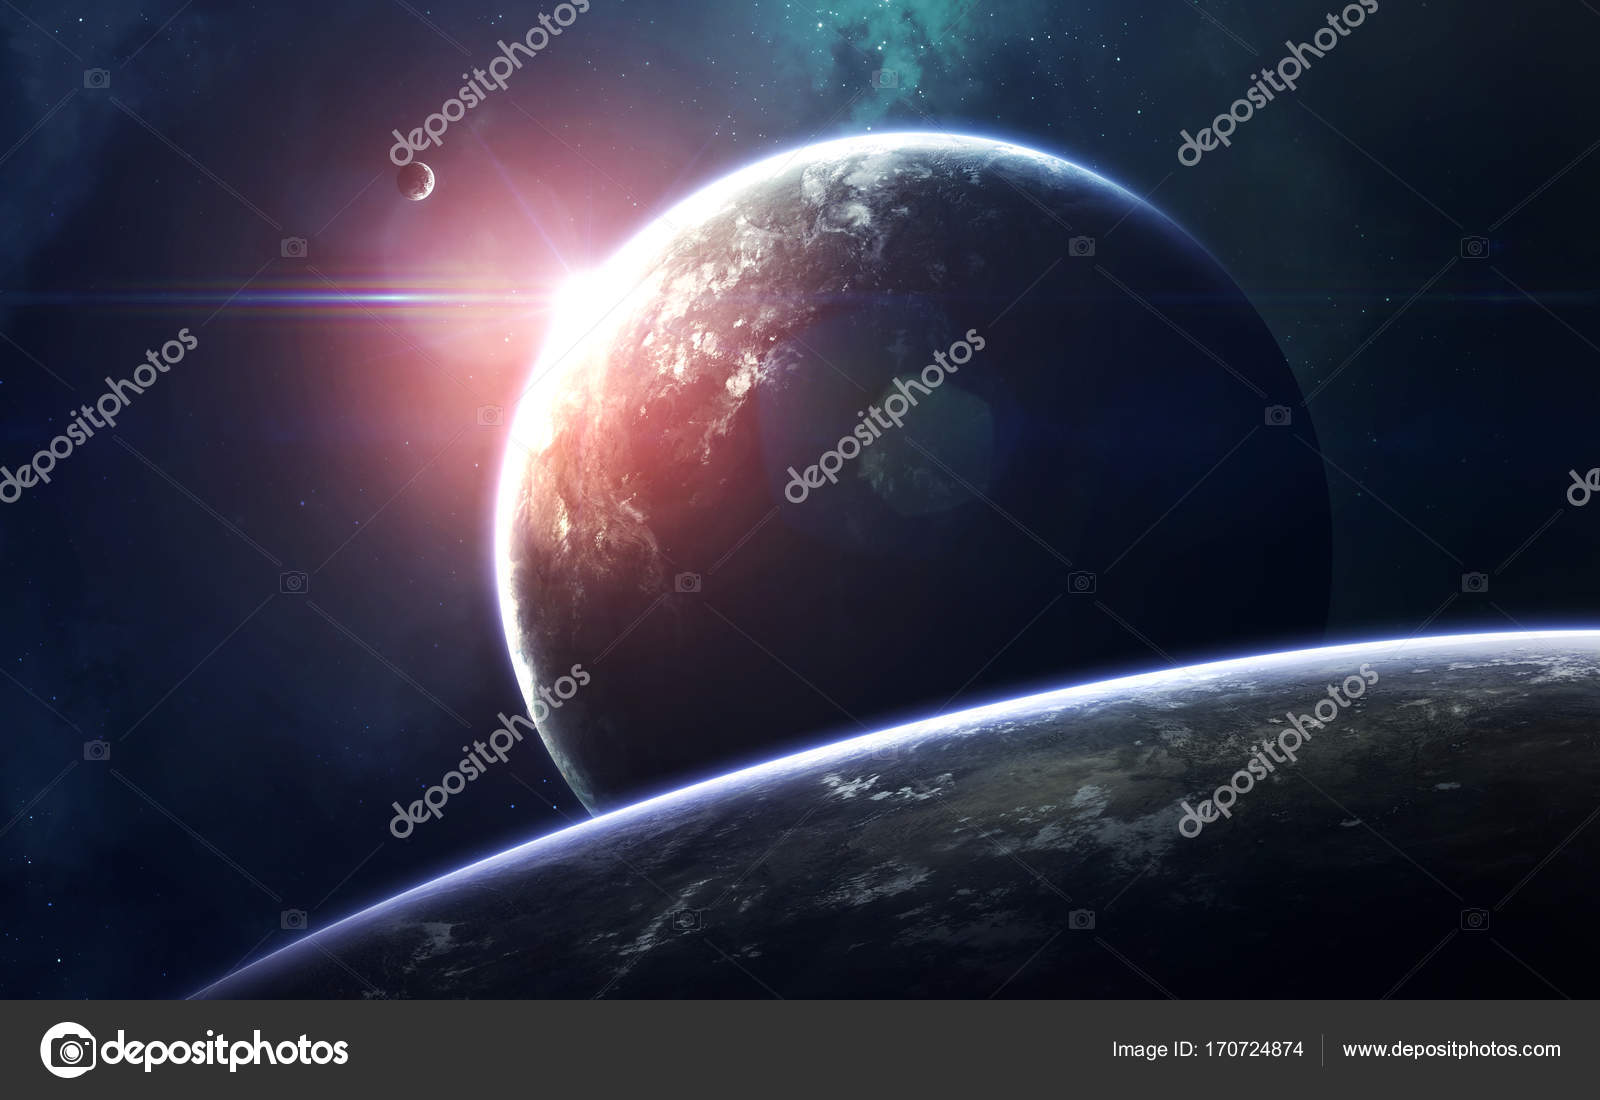 Wallpapers High Definition Universe Wallpaper Space Art